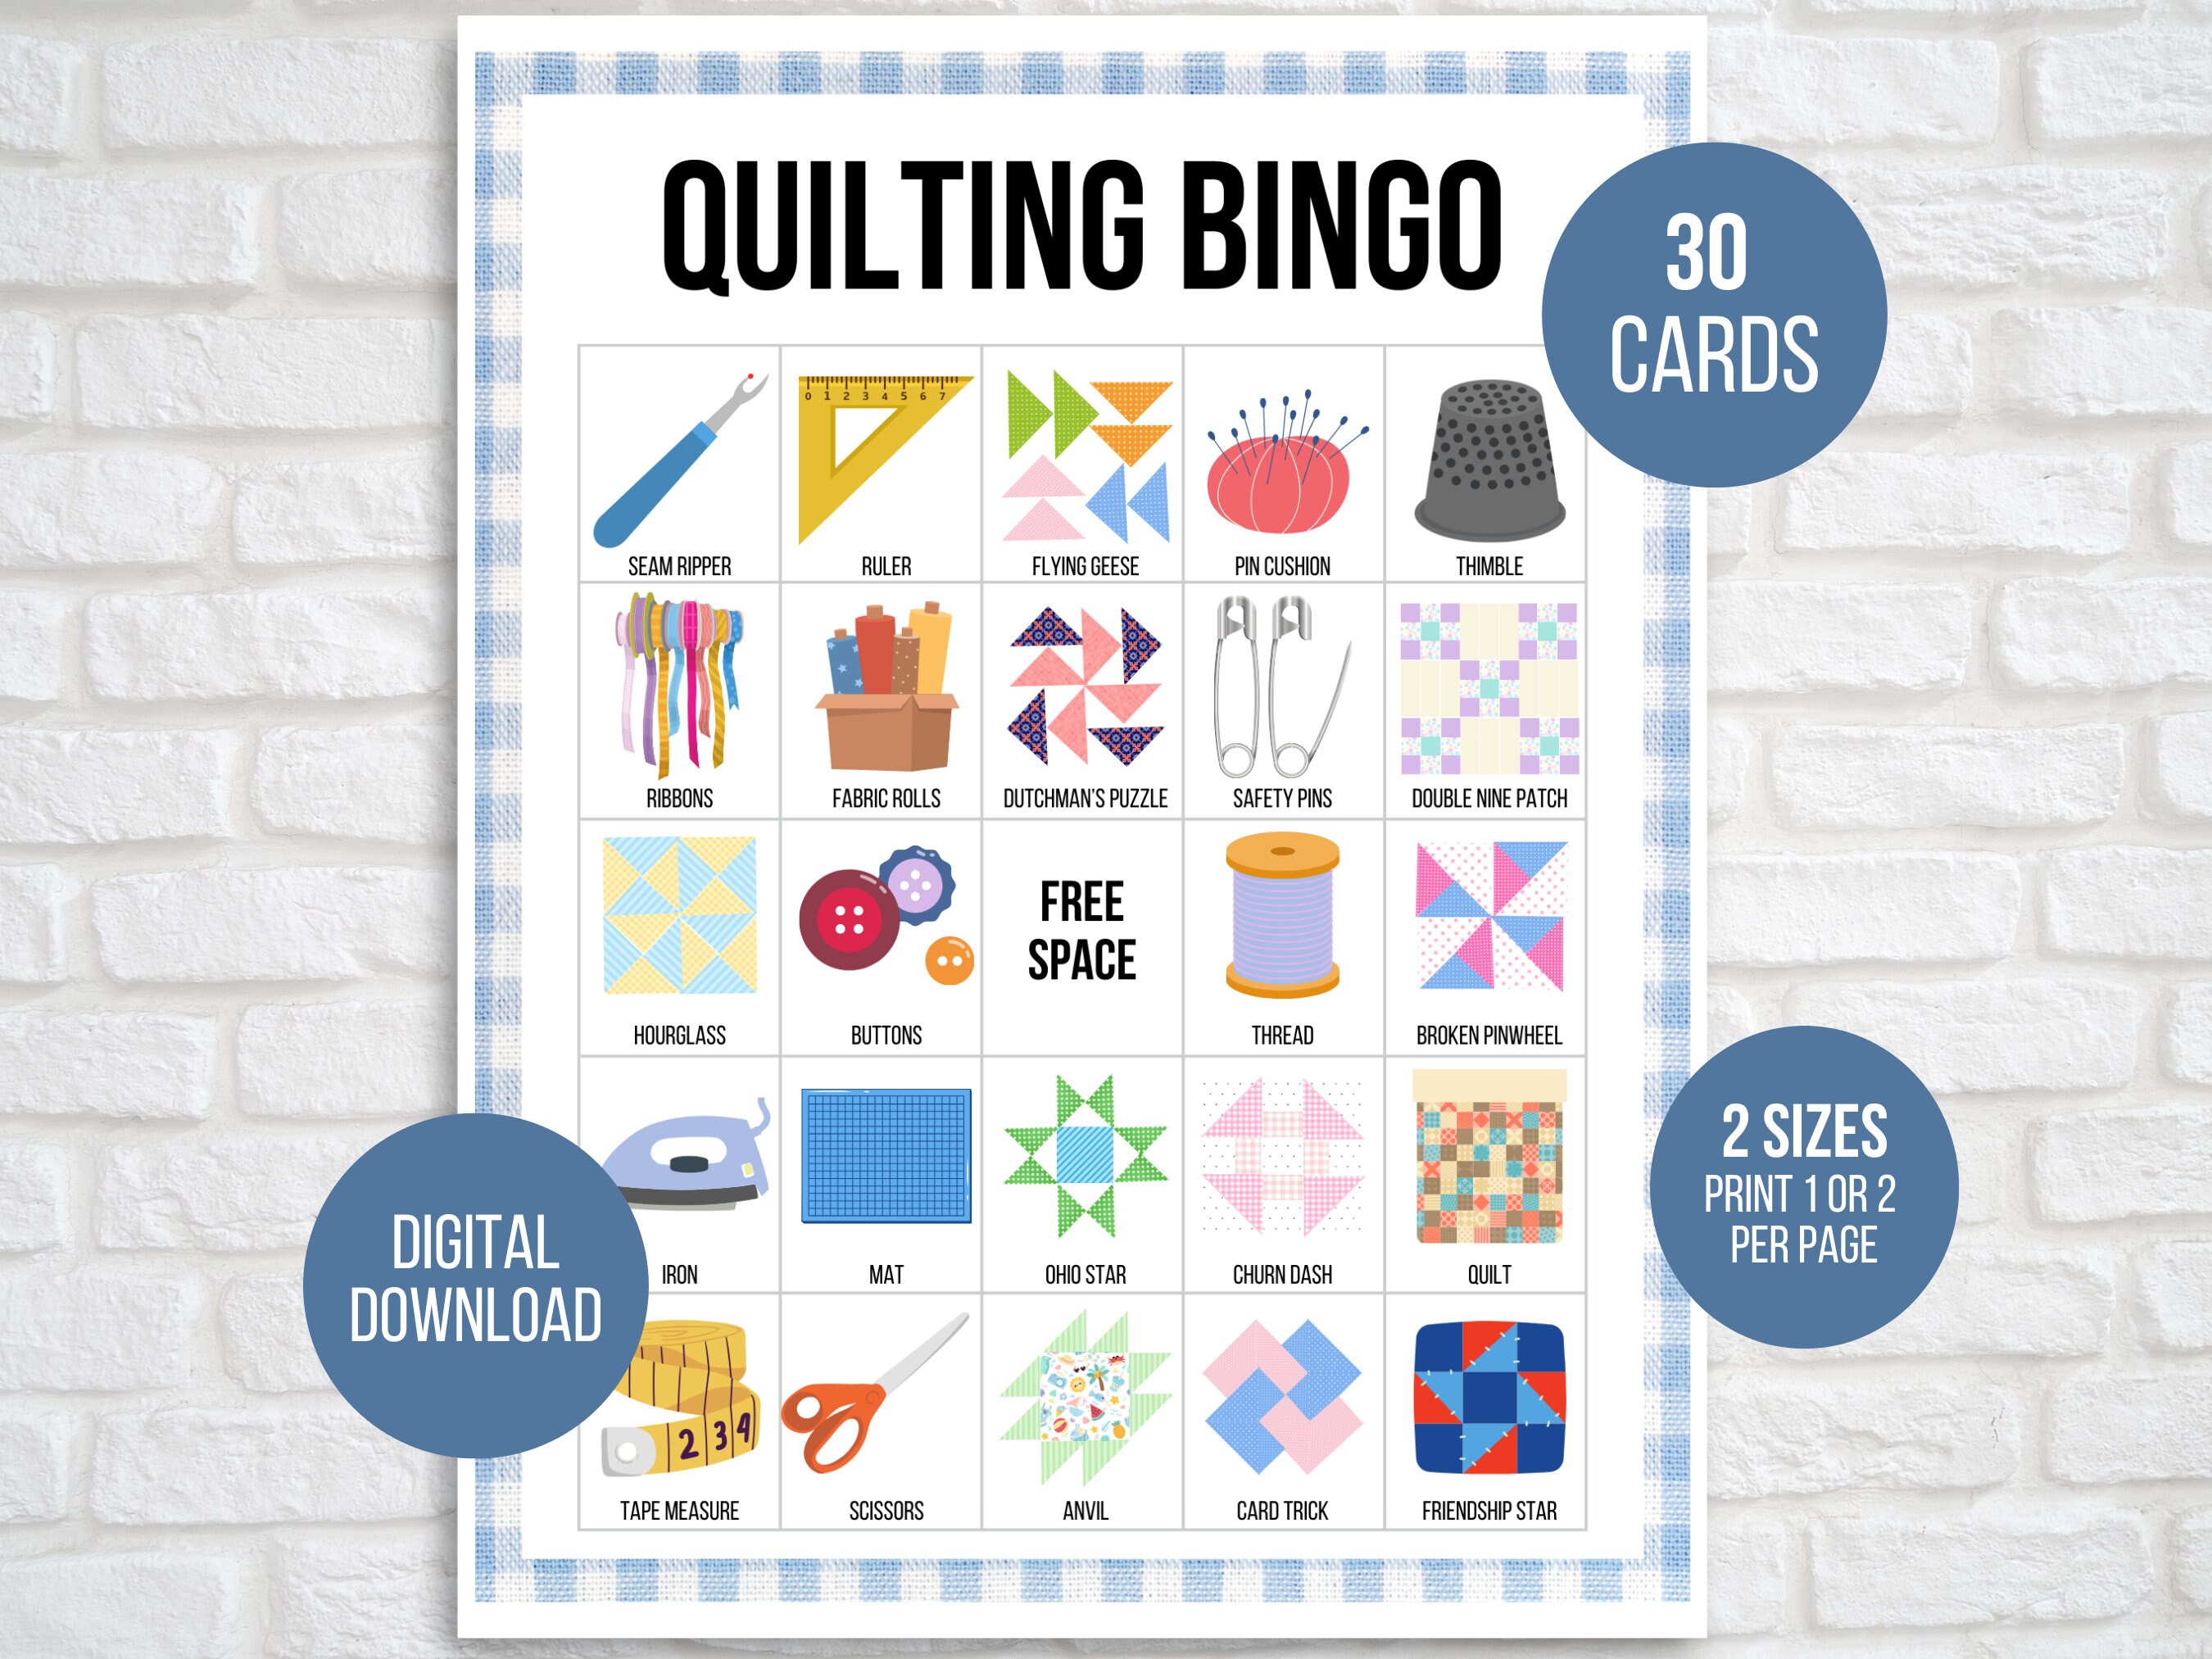 Gift Ideas for Retreats & Quilting Friends - A Quilting Life